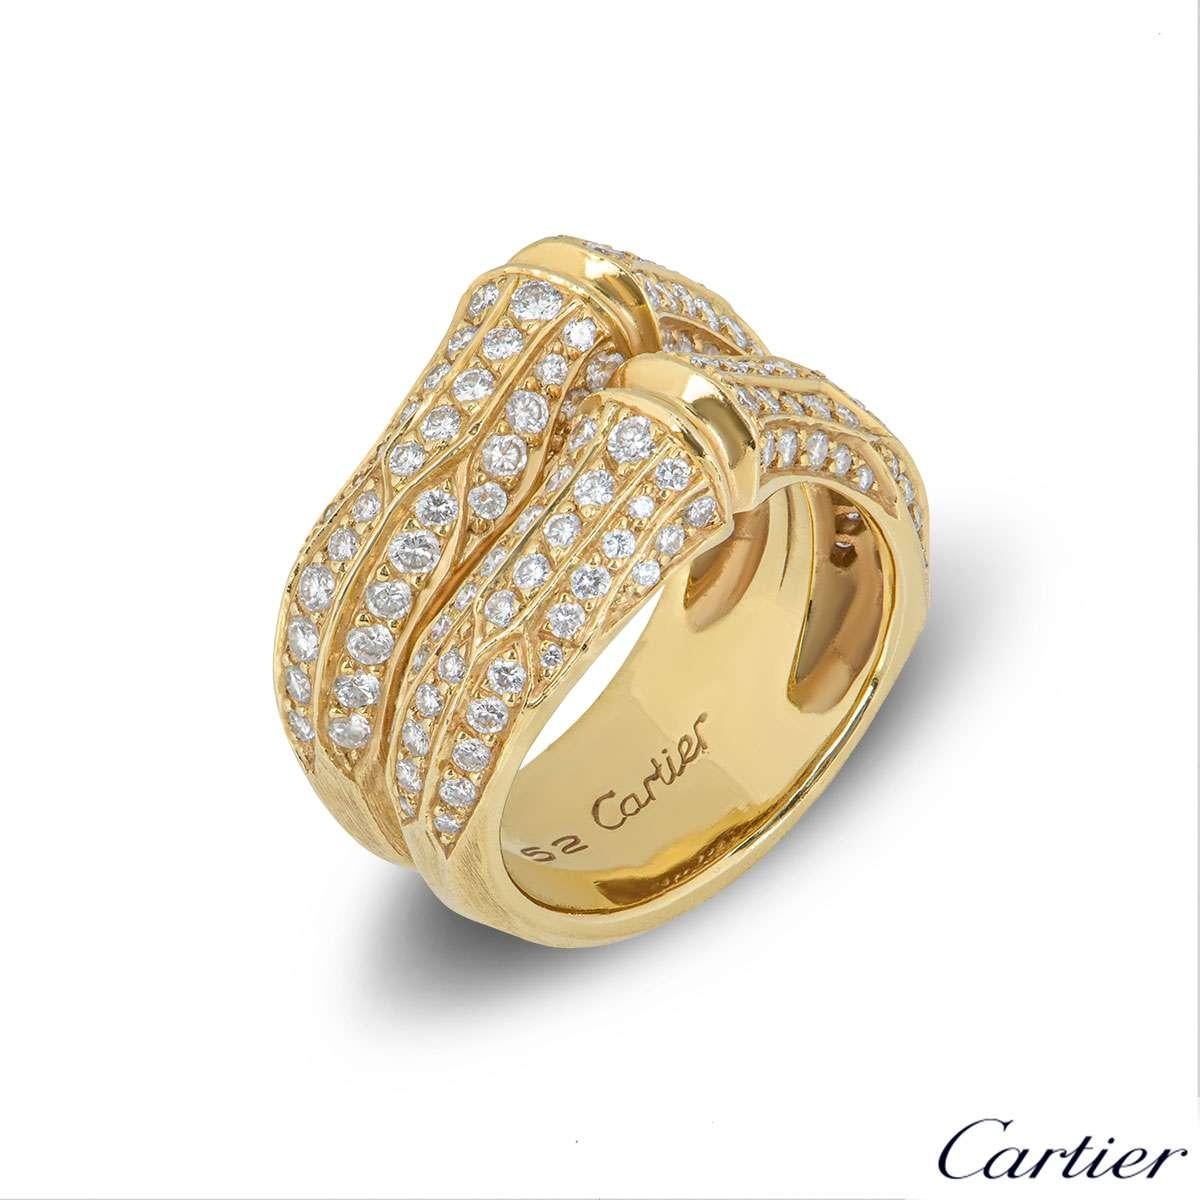 An 18k yellow gold diamond set ring from the Cartier Bamboo collection. The ring is set to the centre with 2 iconic bamboo motifs, each pave set with round brilliant cut diamonds totalling approximately 1.65ct. The 12mm ring features a brushed